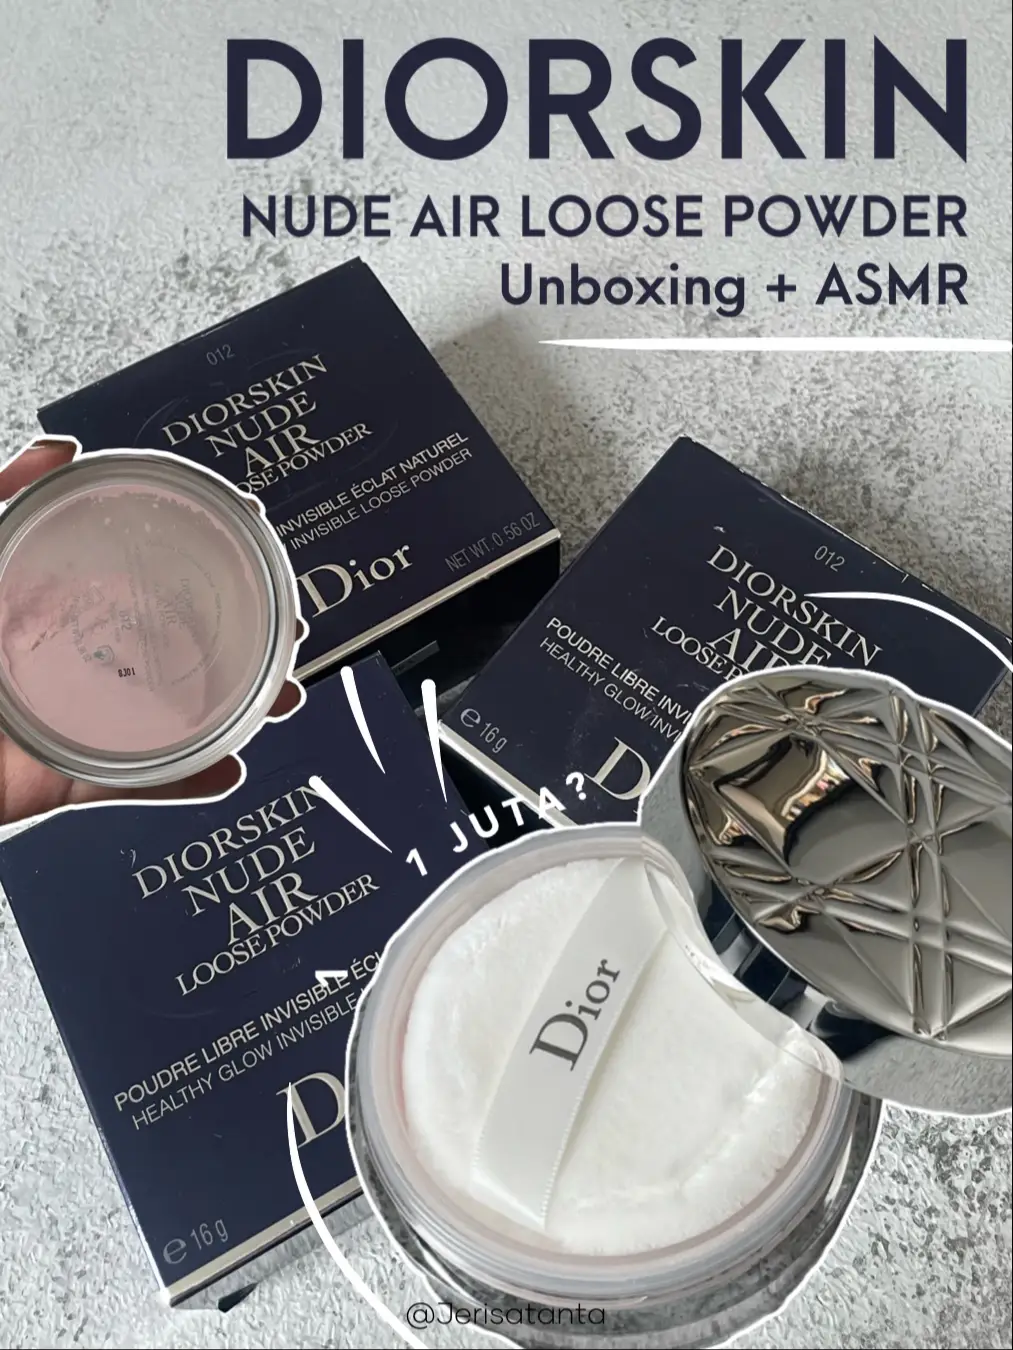 Diorskin Nude Air Loose Powder (Unboxing + ASMR) | Article posted